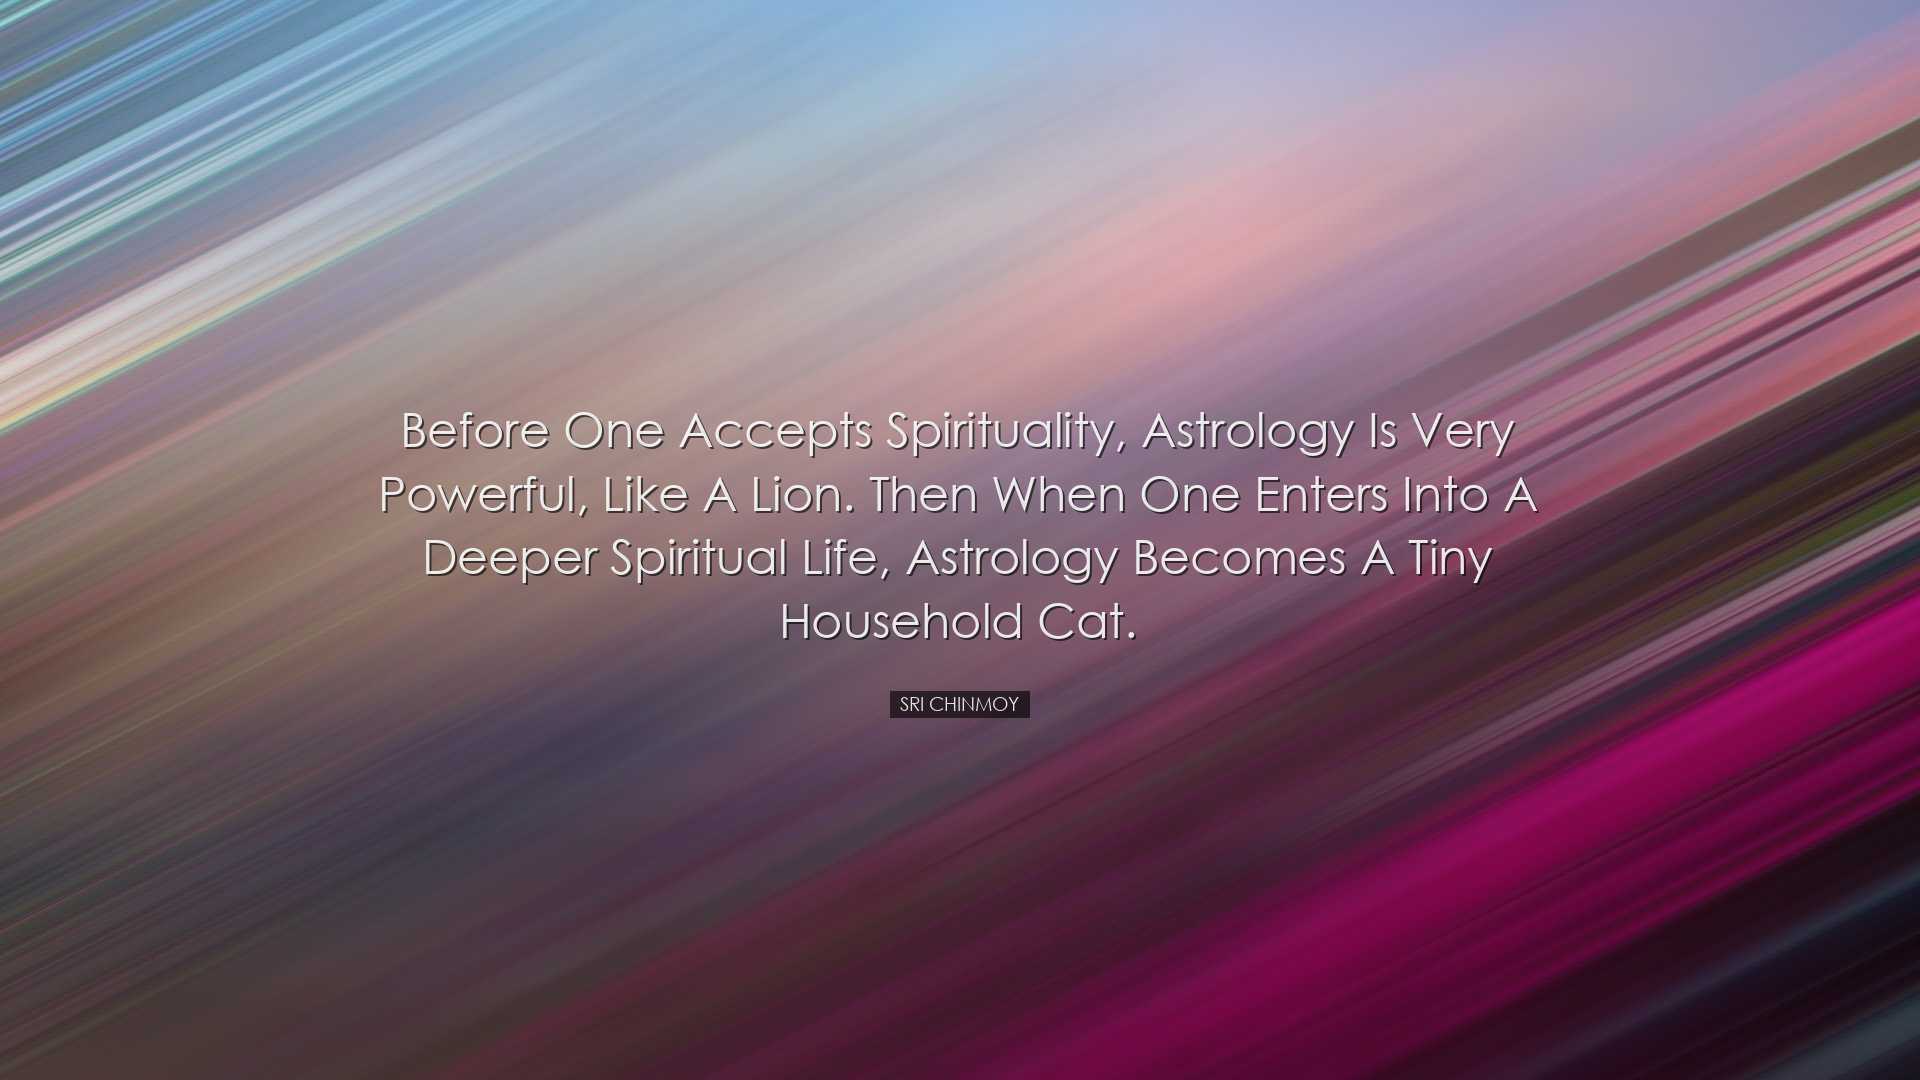 Before one accepts spirituality, astrology is very powerful, like